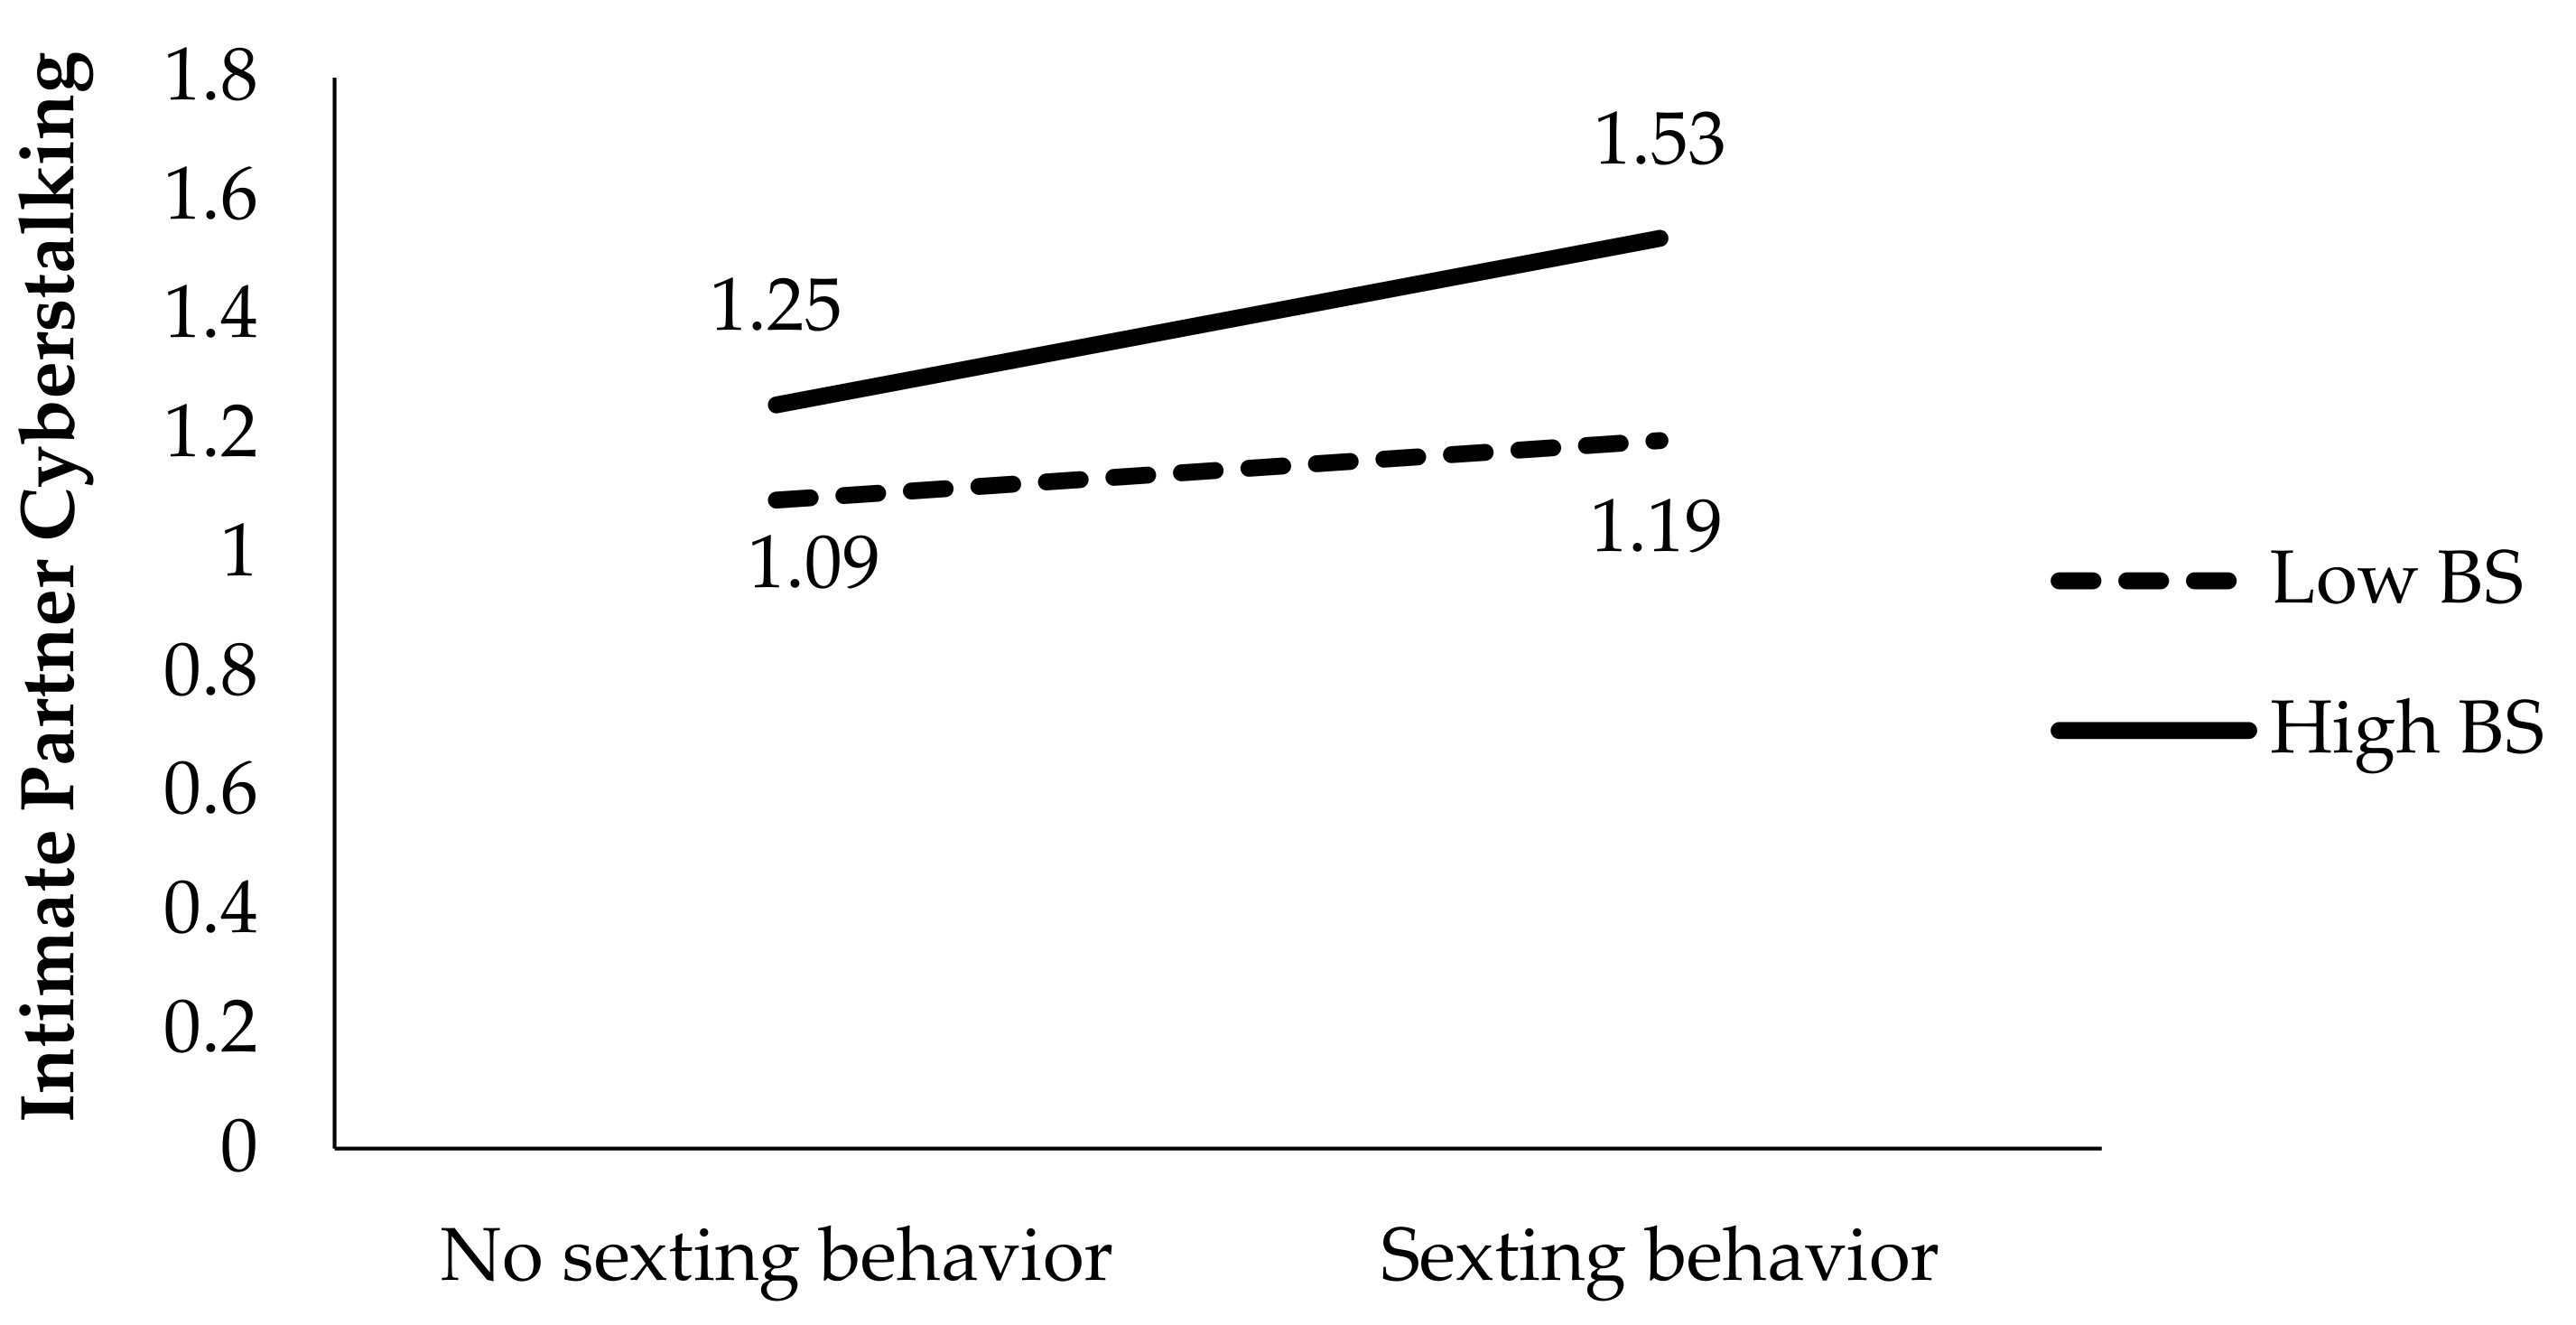 IJERPH | Free Full-Text | Intimate Partner Cyberstalking, Sexism,  Pornography, and Sexting in Adolescents: New Challenges for Sex Education |  HTML